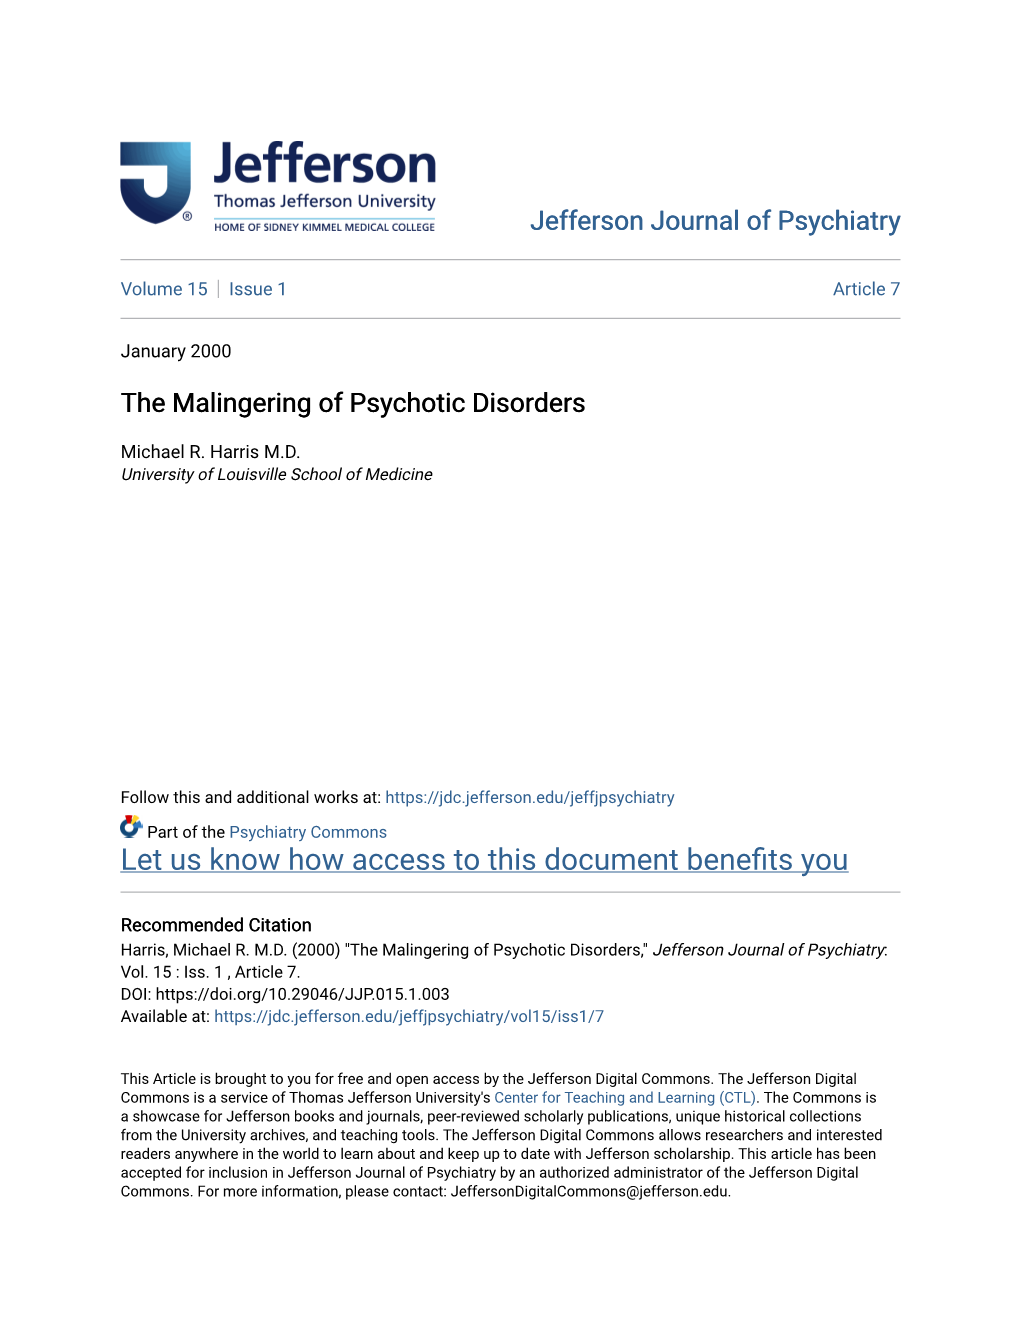 The Malingering of Psychotic Disorders